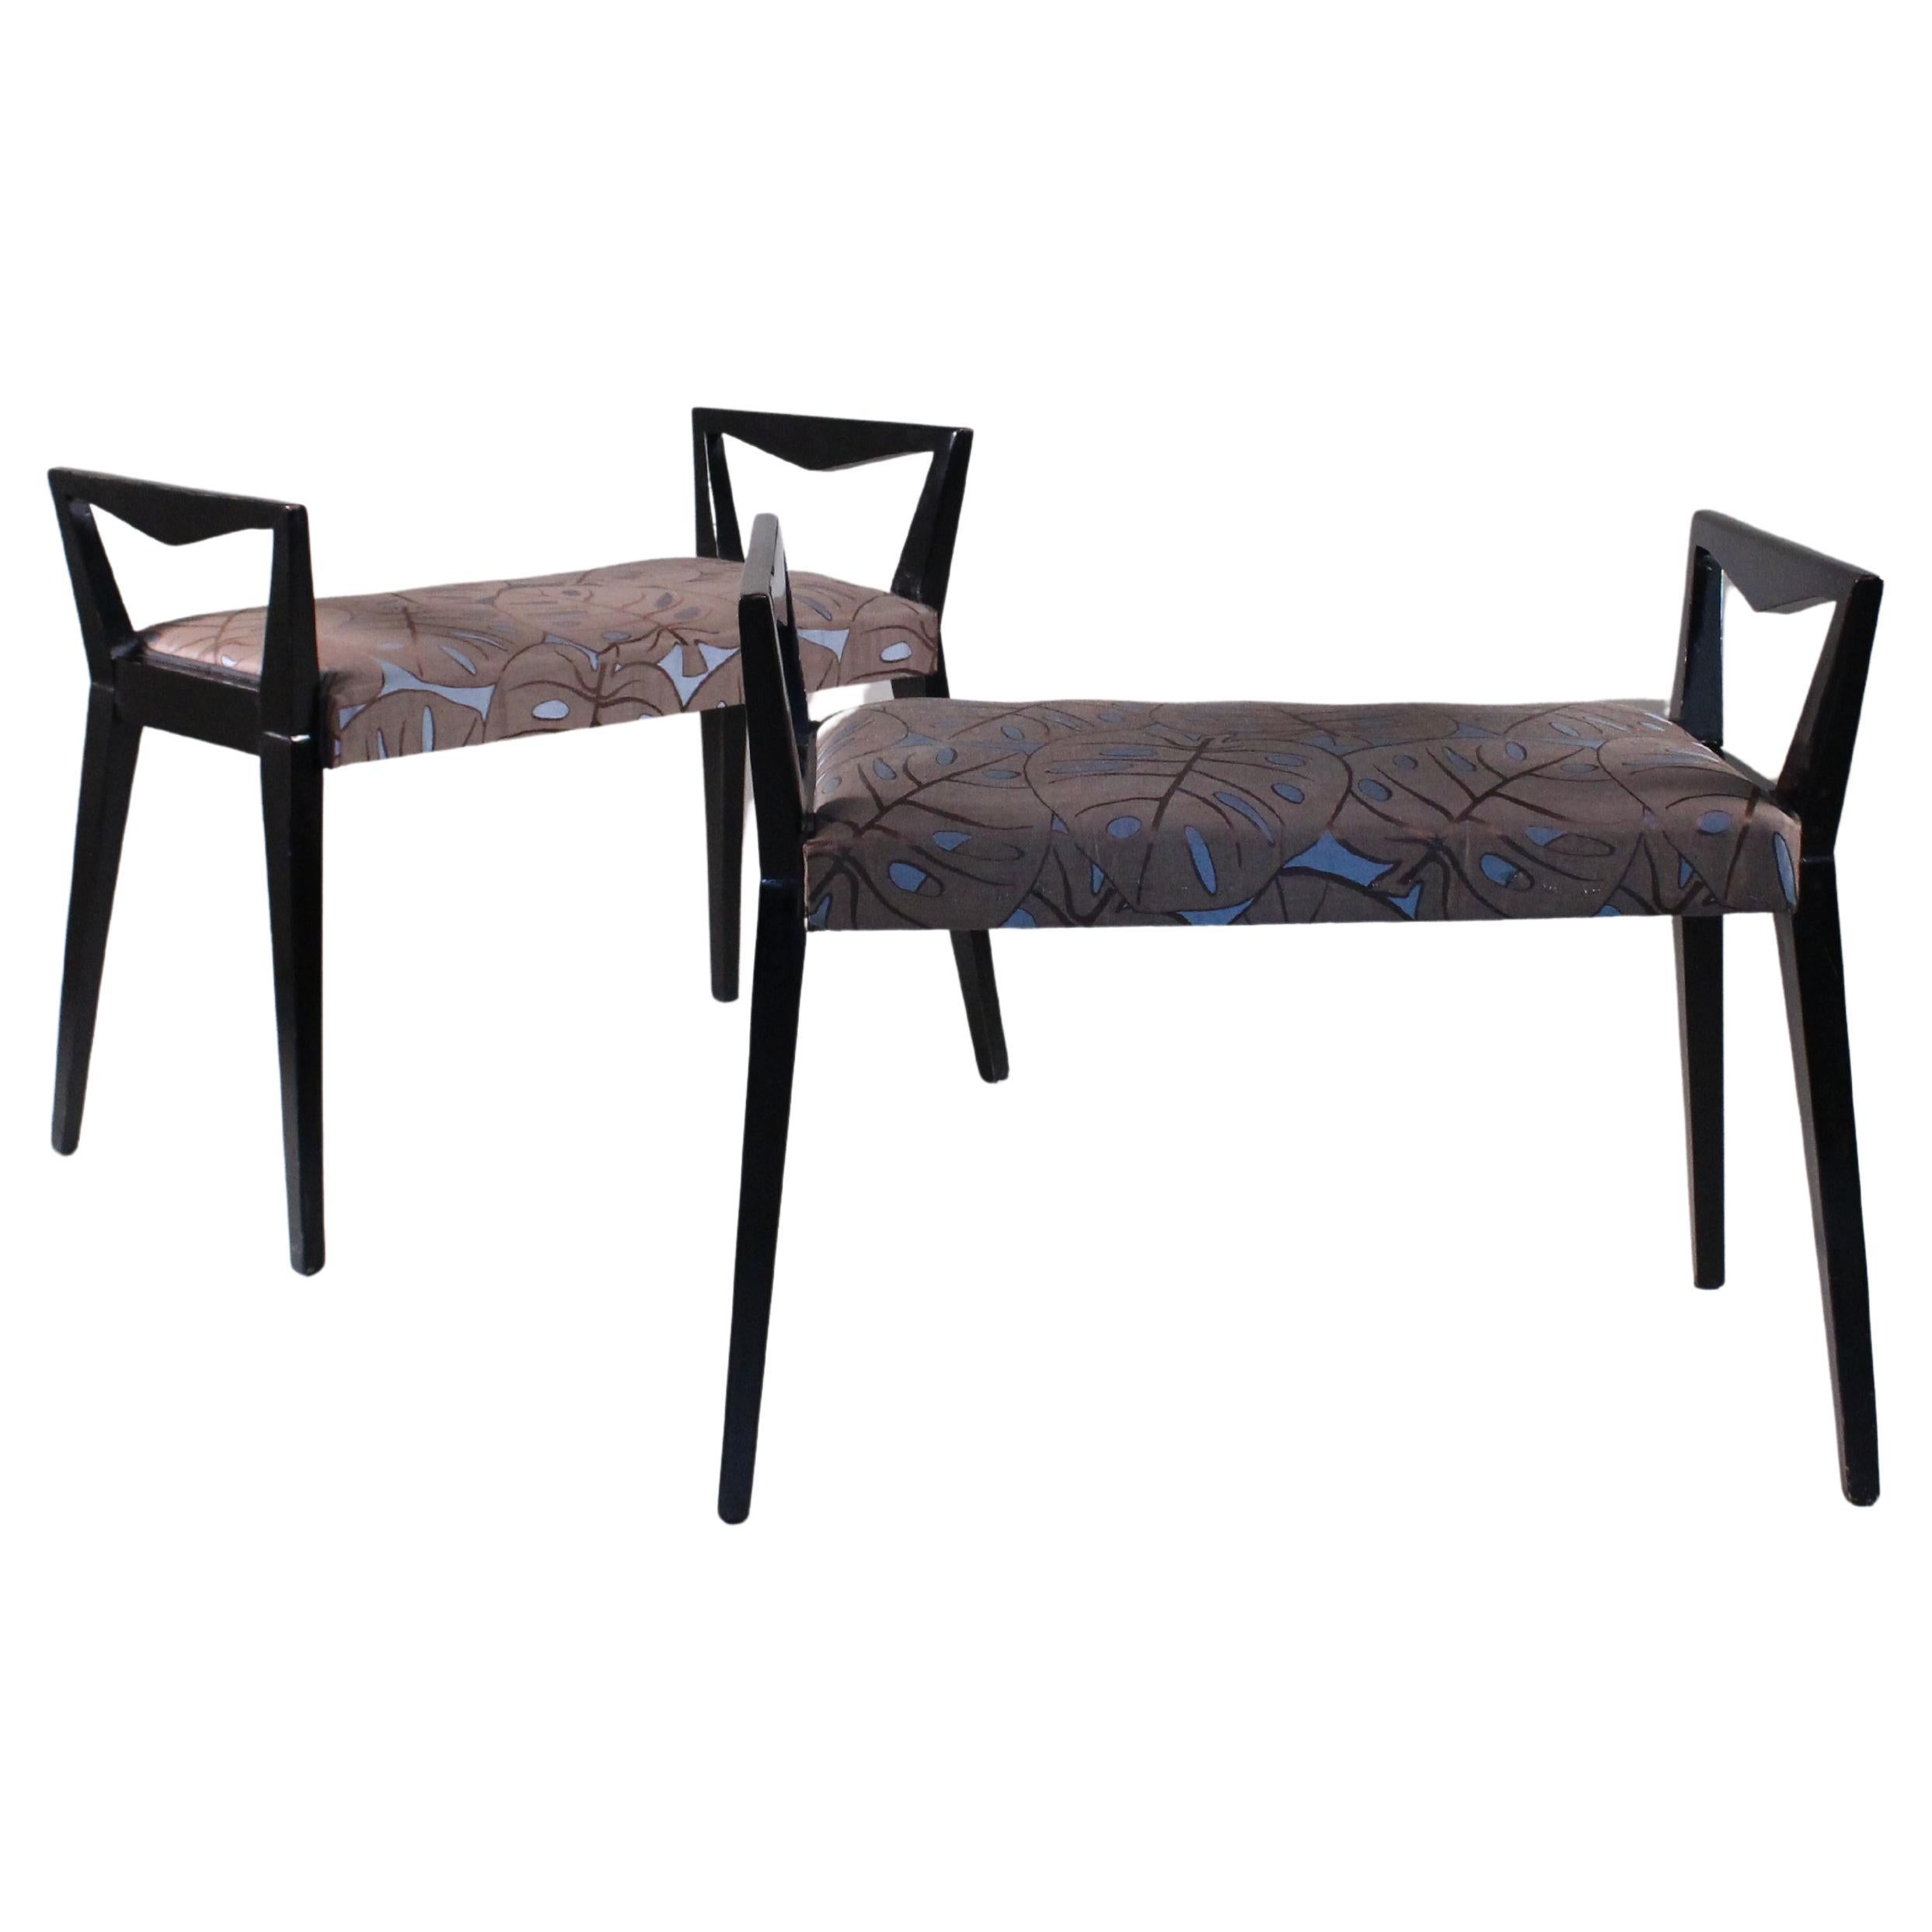 Set of 2 black benches by Guglielmo Ulrich